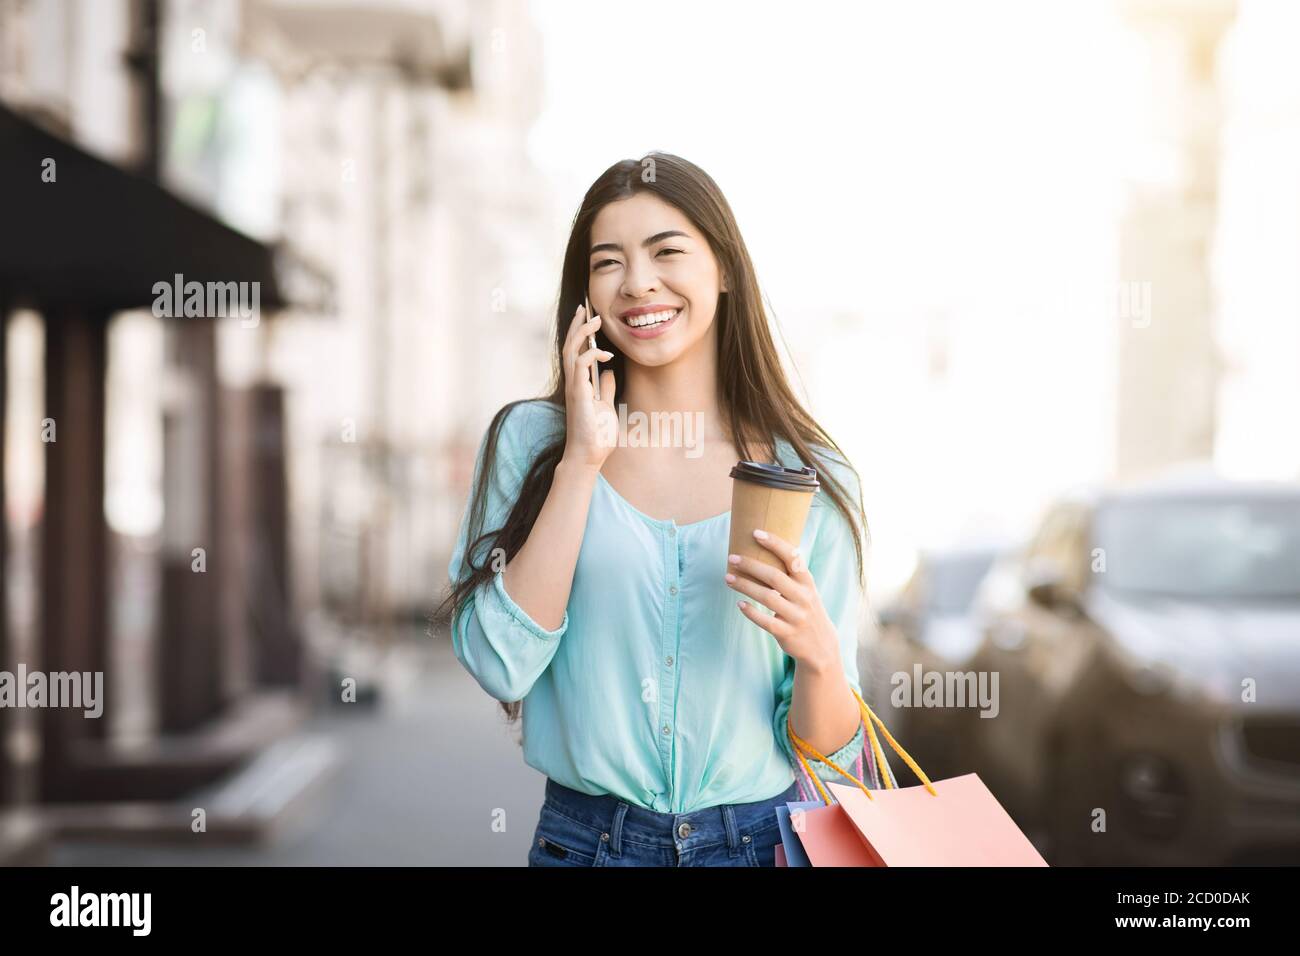 AsianWoman Walking With Shopper Bags And Coffee And Talking On Celphone Stock Photo